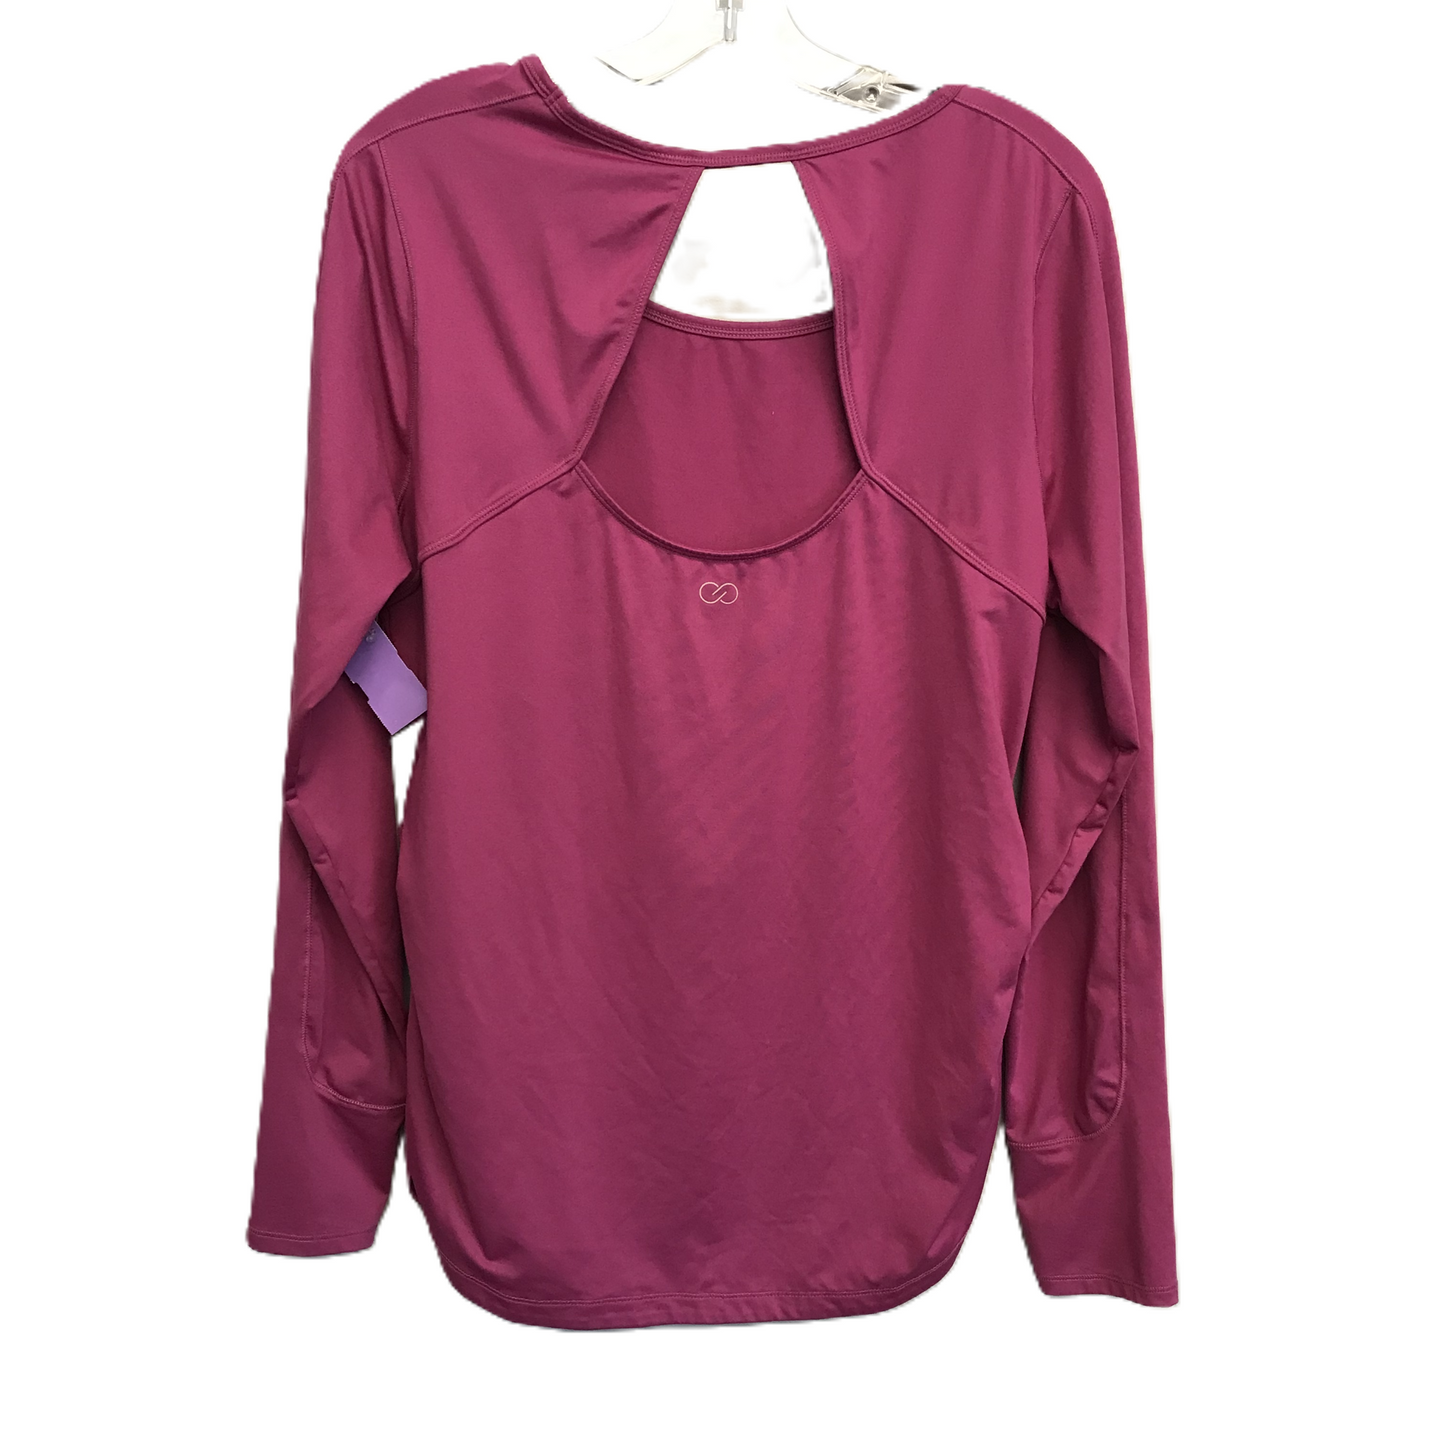 Pink Athletic Top Long Sleeve Crewneck By Calia, Size: Xs